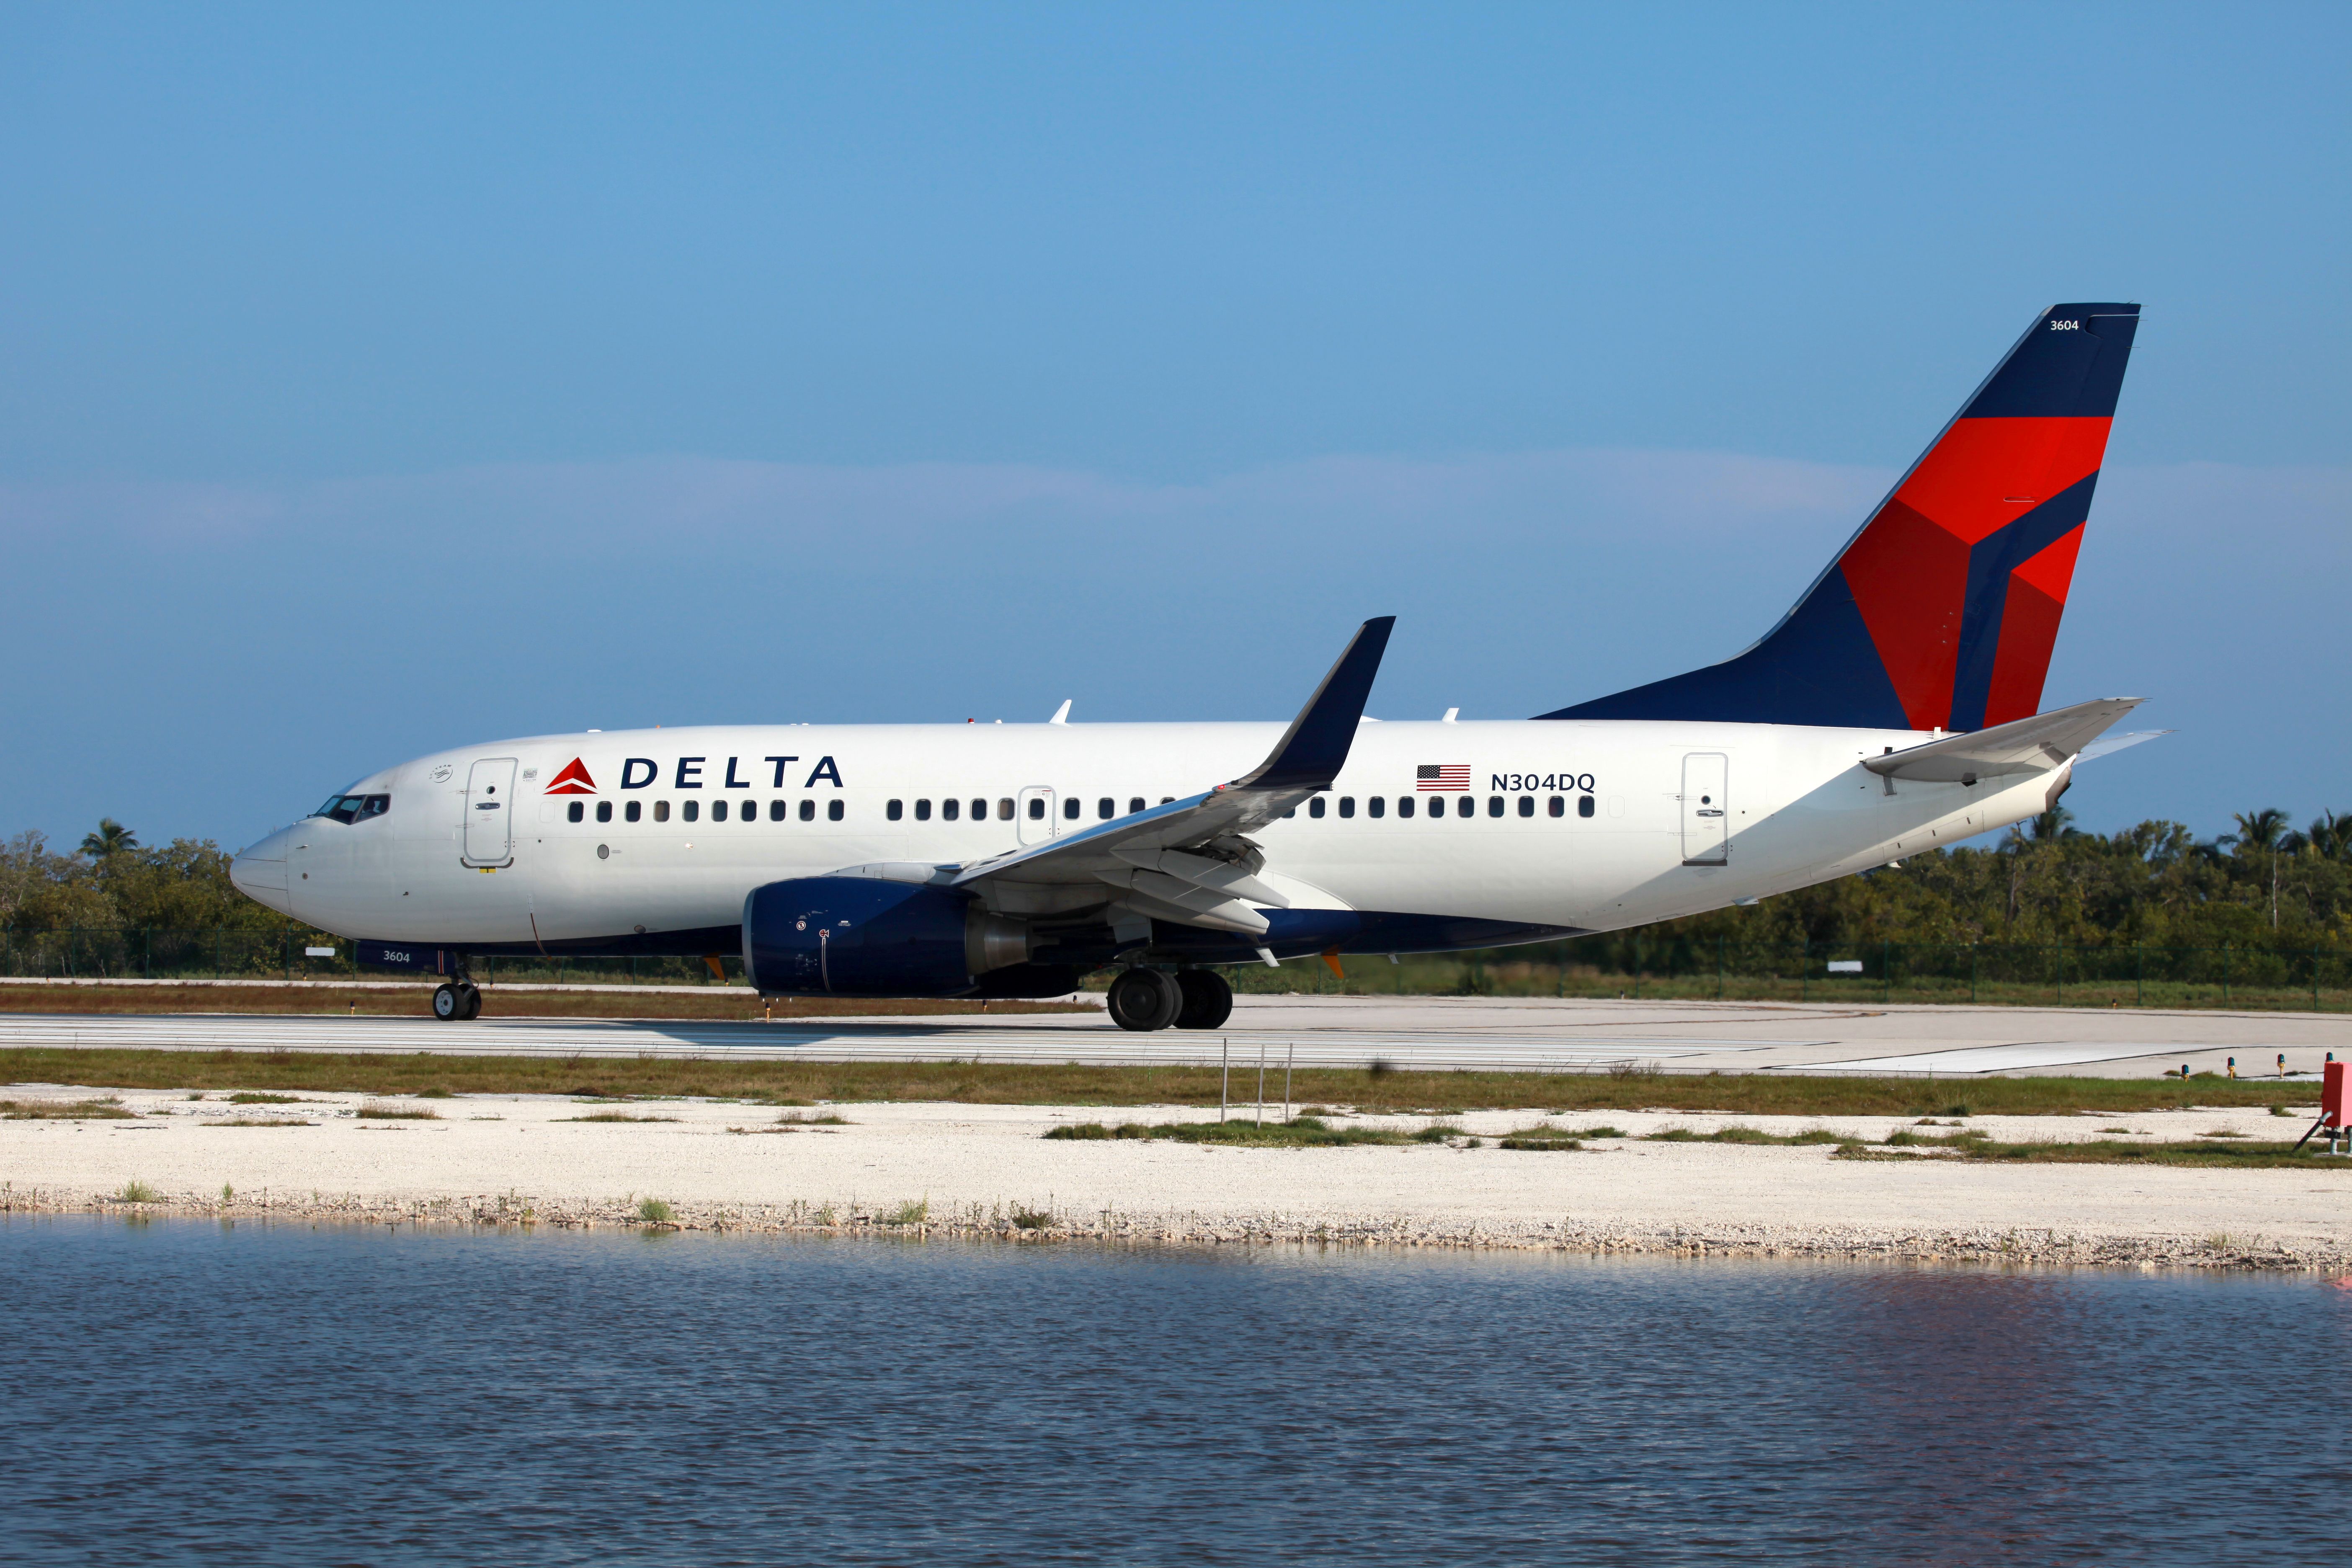 Delta Air Lines Boeing 737 at Key West Airport